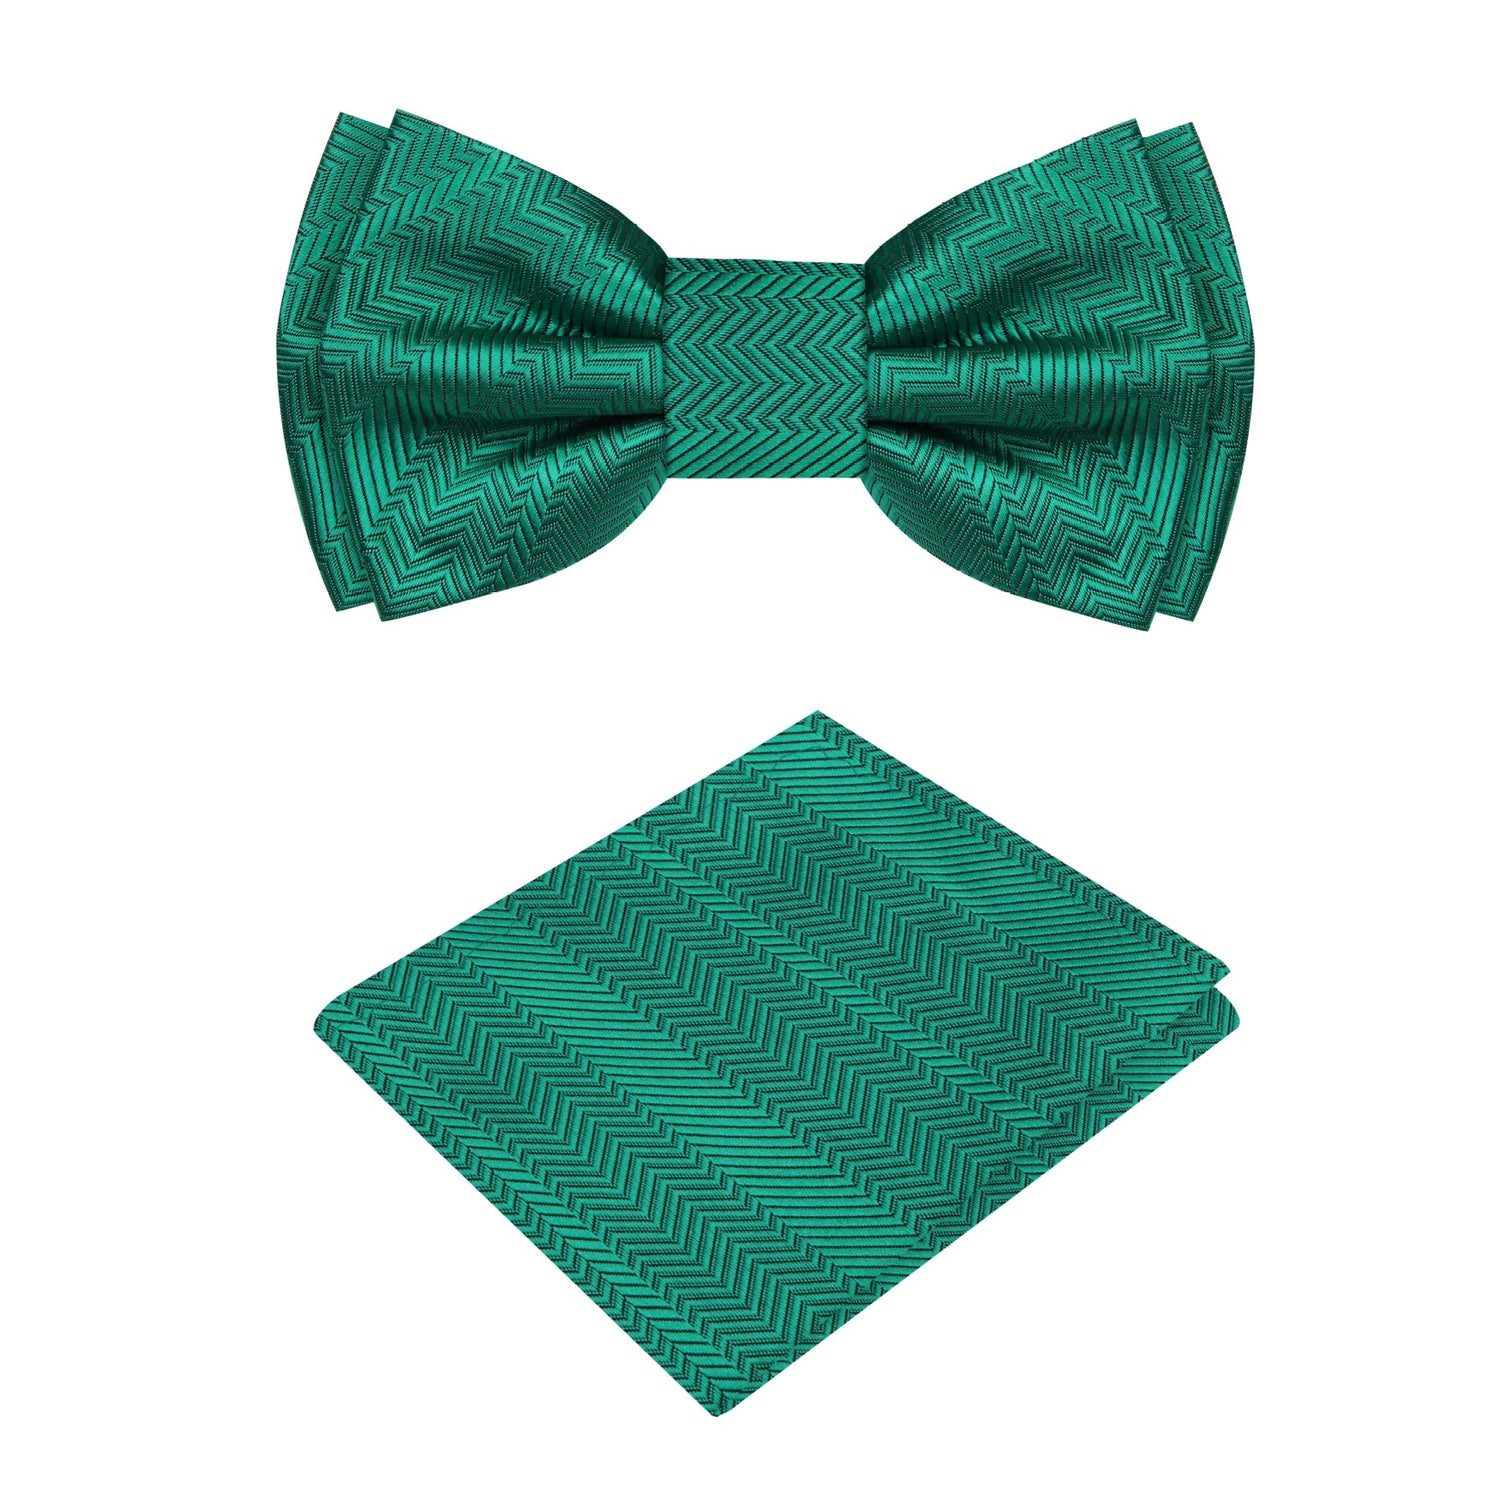 A Solid Shamrock Green Pattern Silk Self Tie Bow Tie, Matching Pocket Square